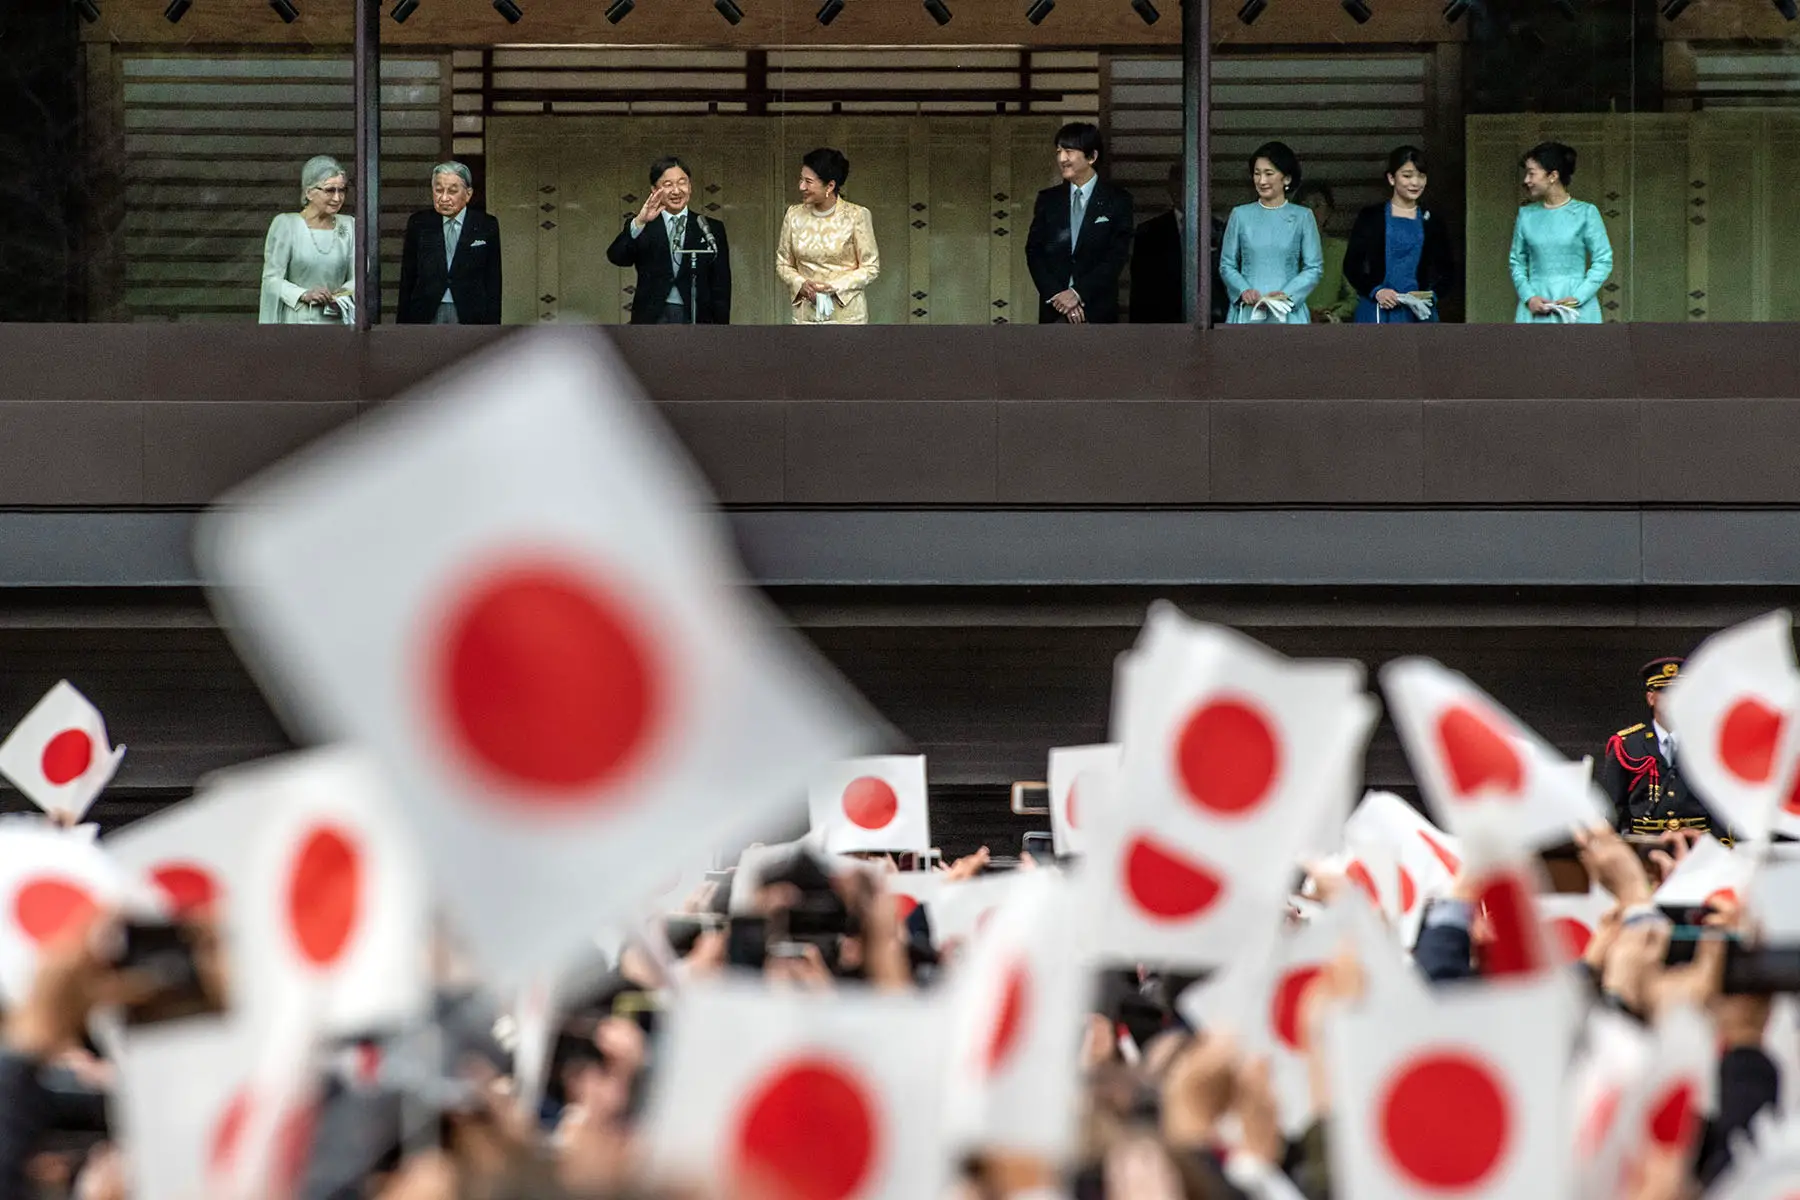 Emperor Naruhito waves at the people during a traditional New Year's greetingin 2020 at the Imperial Palace in Tokyo, Japan.